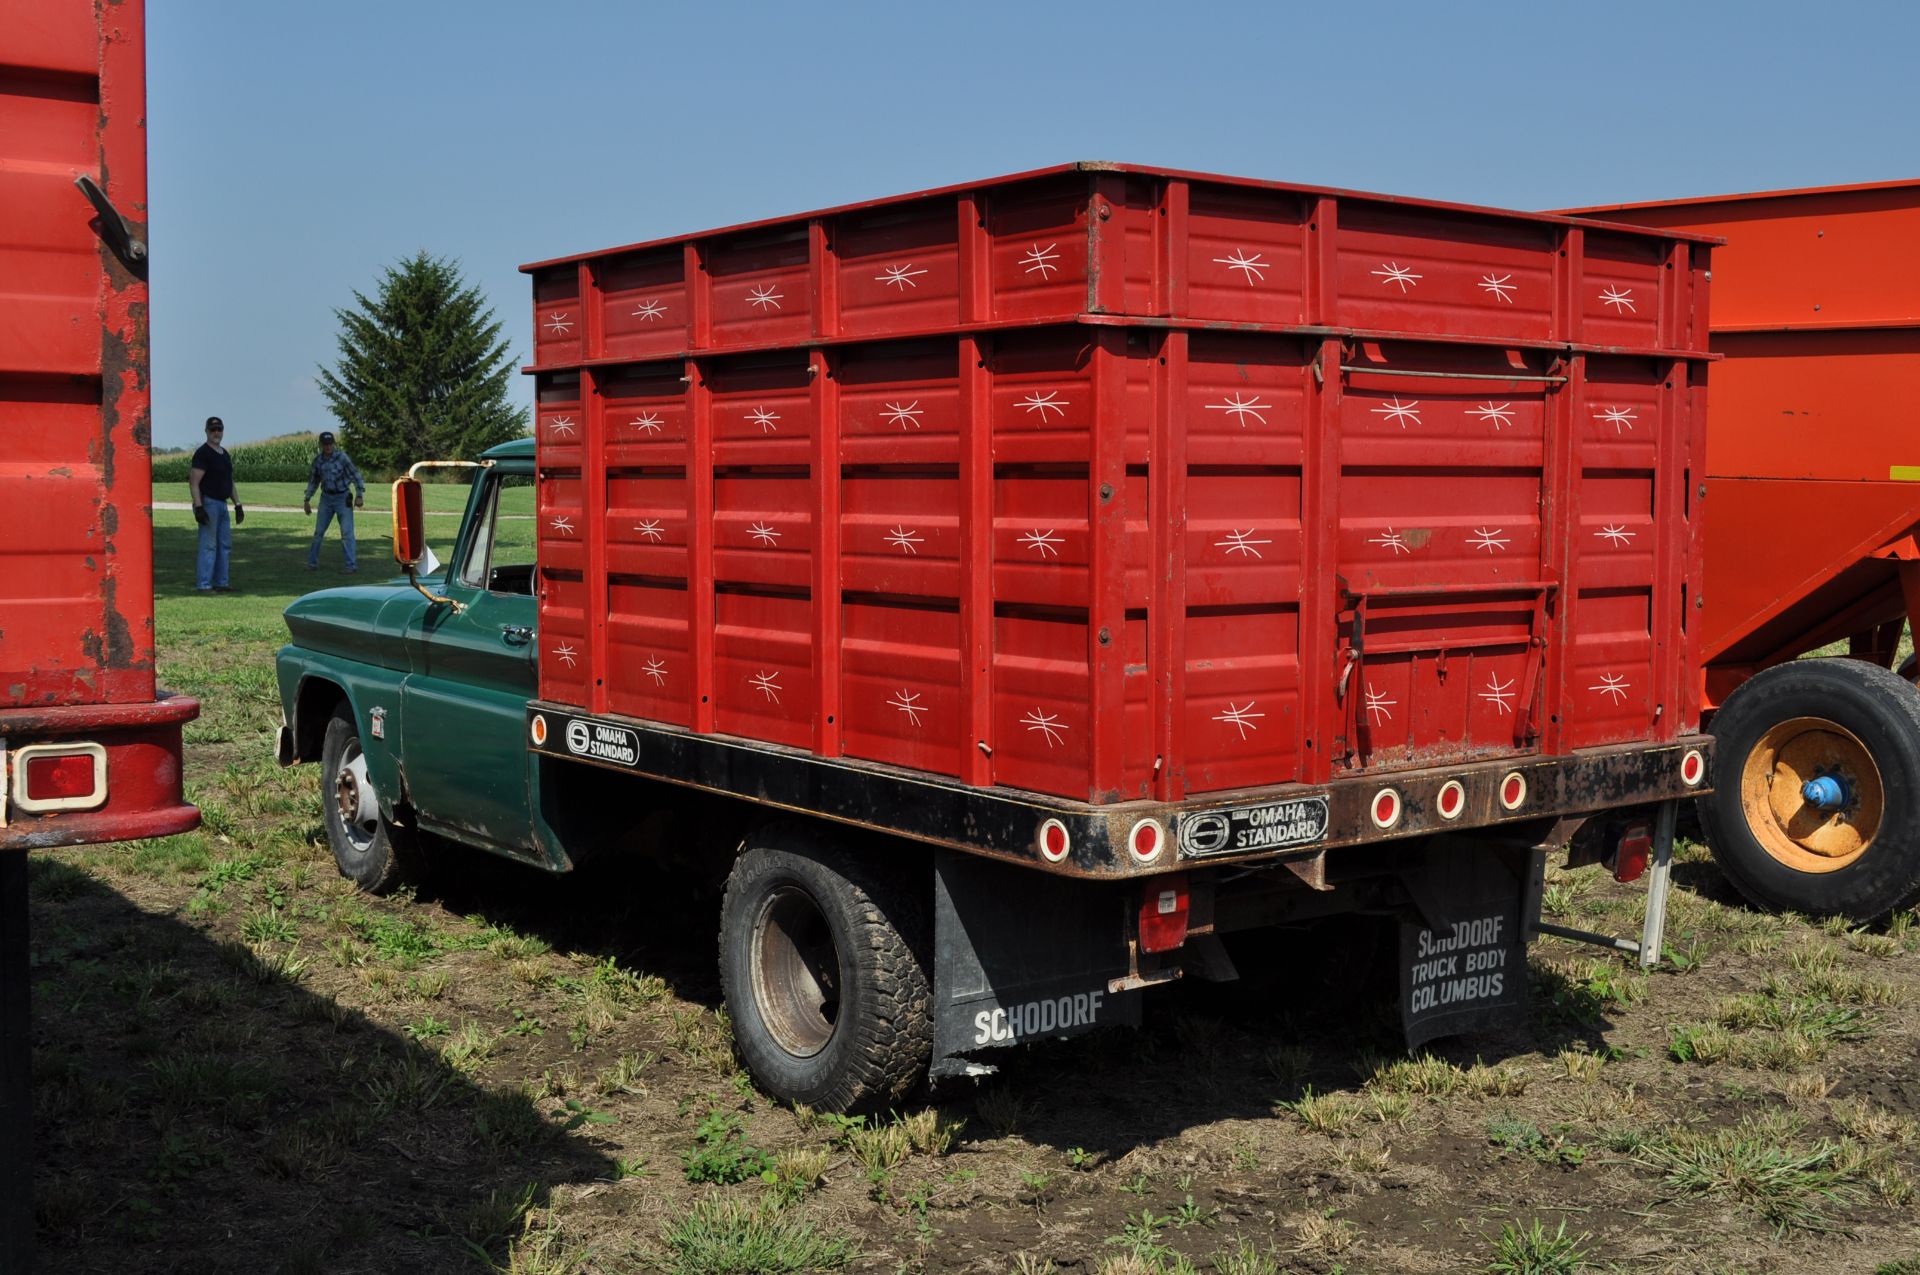 1964 Chevrolet 30 1 ton truck, 230 6 cyl gas engine, 4 spd manual trans, 134” WB, 235/85R16 tires - Image 4 of 20